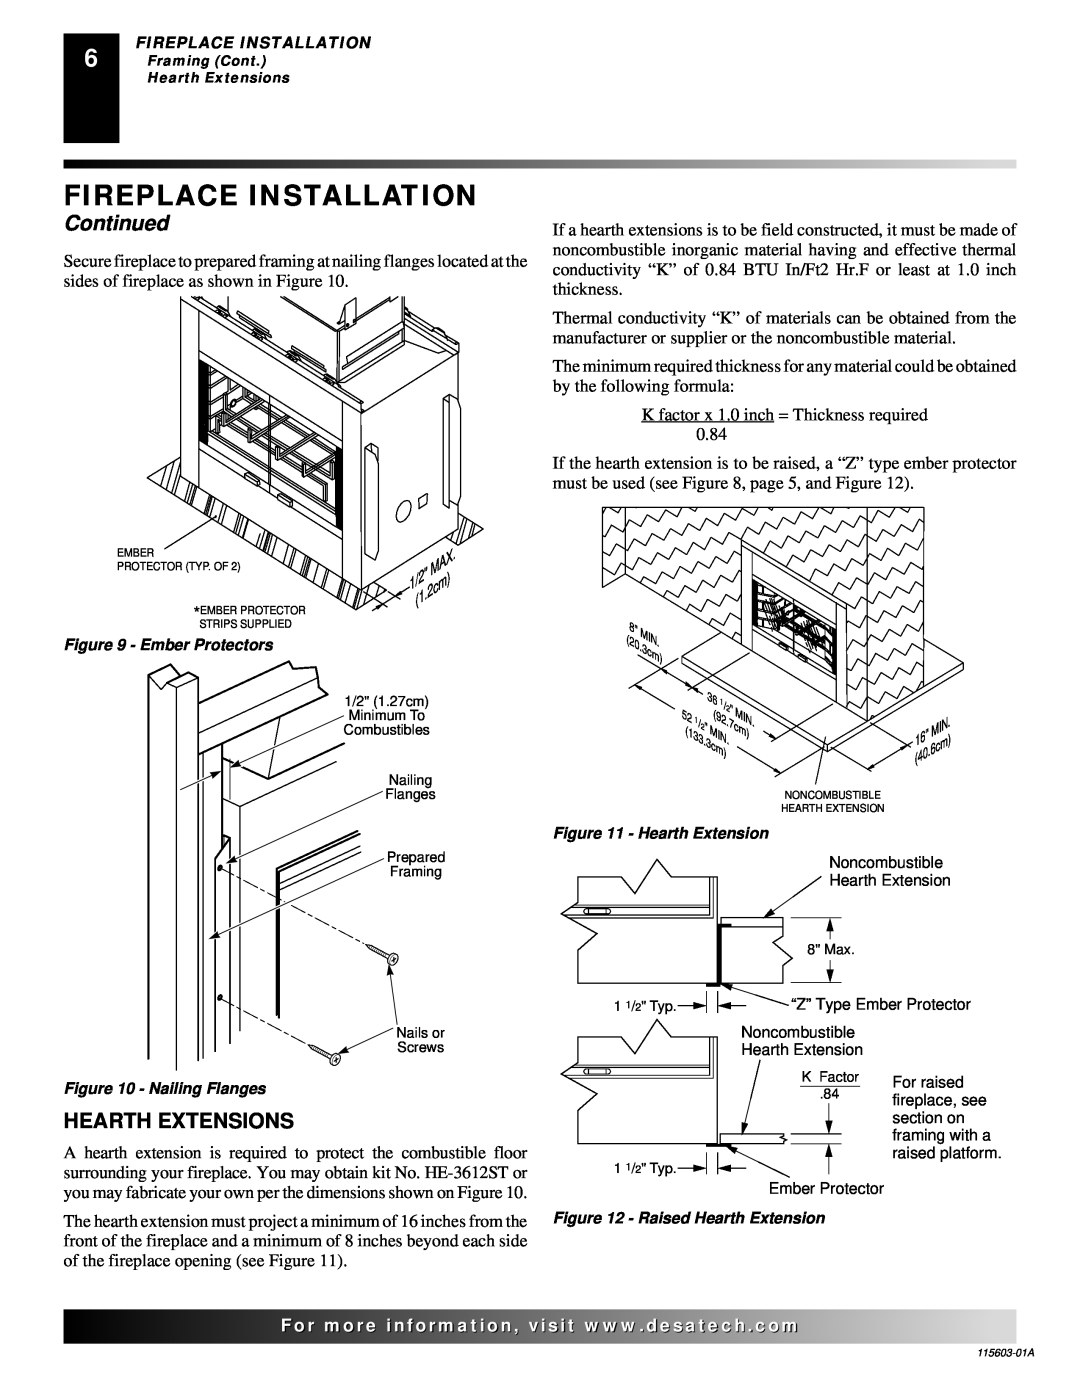 Desa (V)3612ST operating instructions Fireplace Installation, Continued, Hearth Extensions 